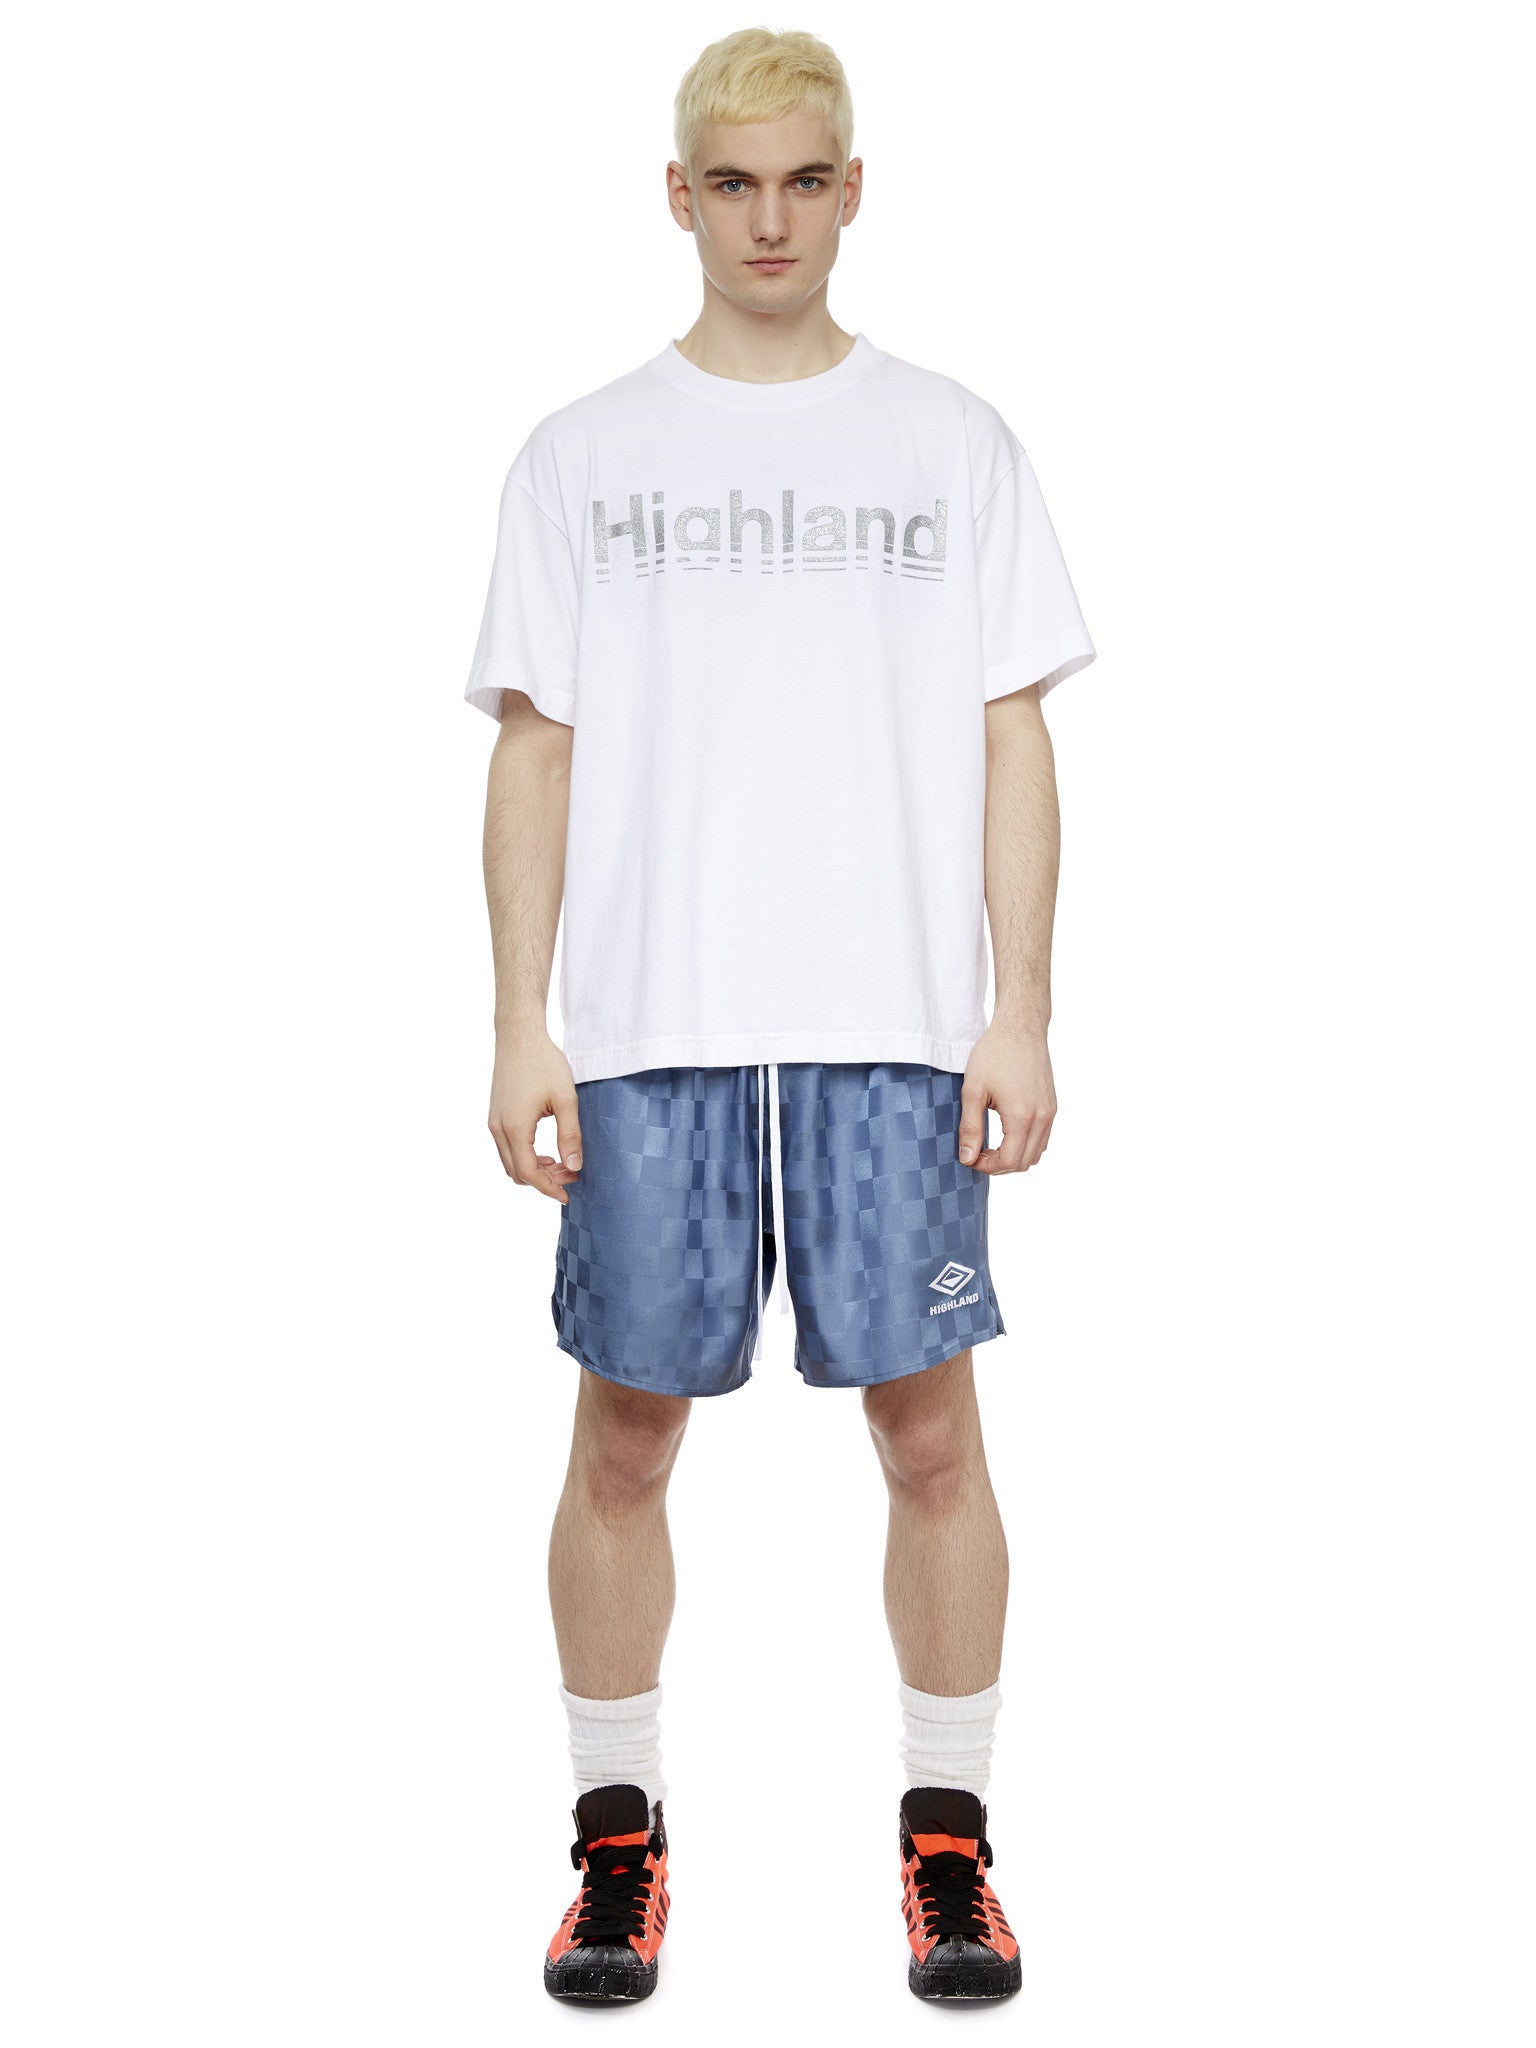 S/S Logo T-Shirt in White/Silver